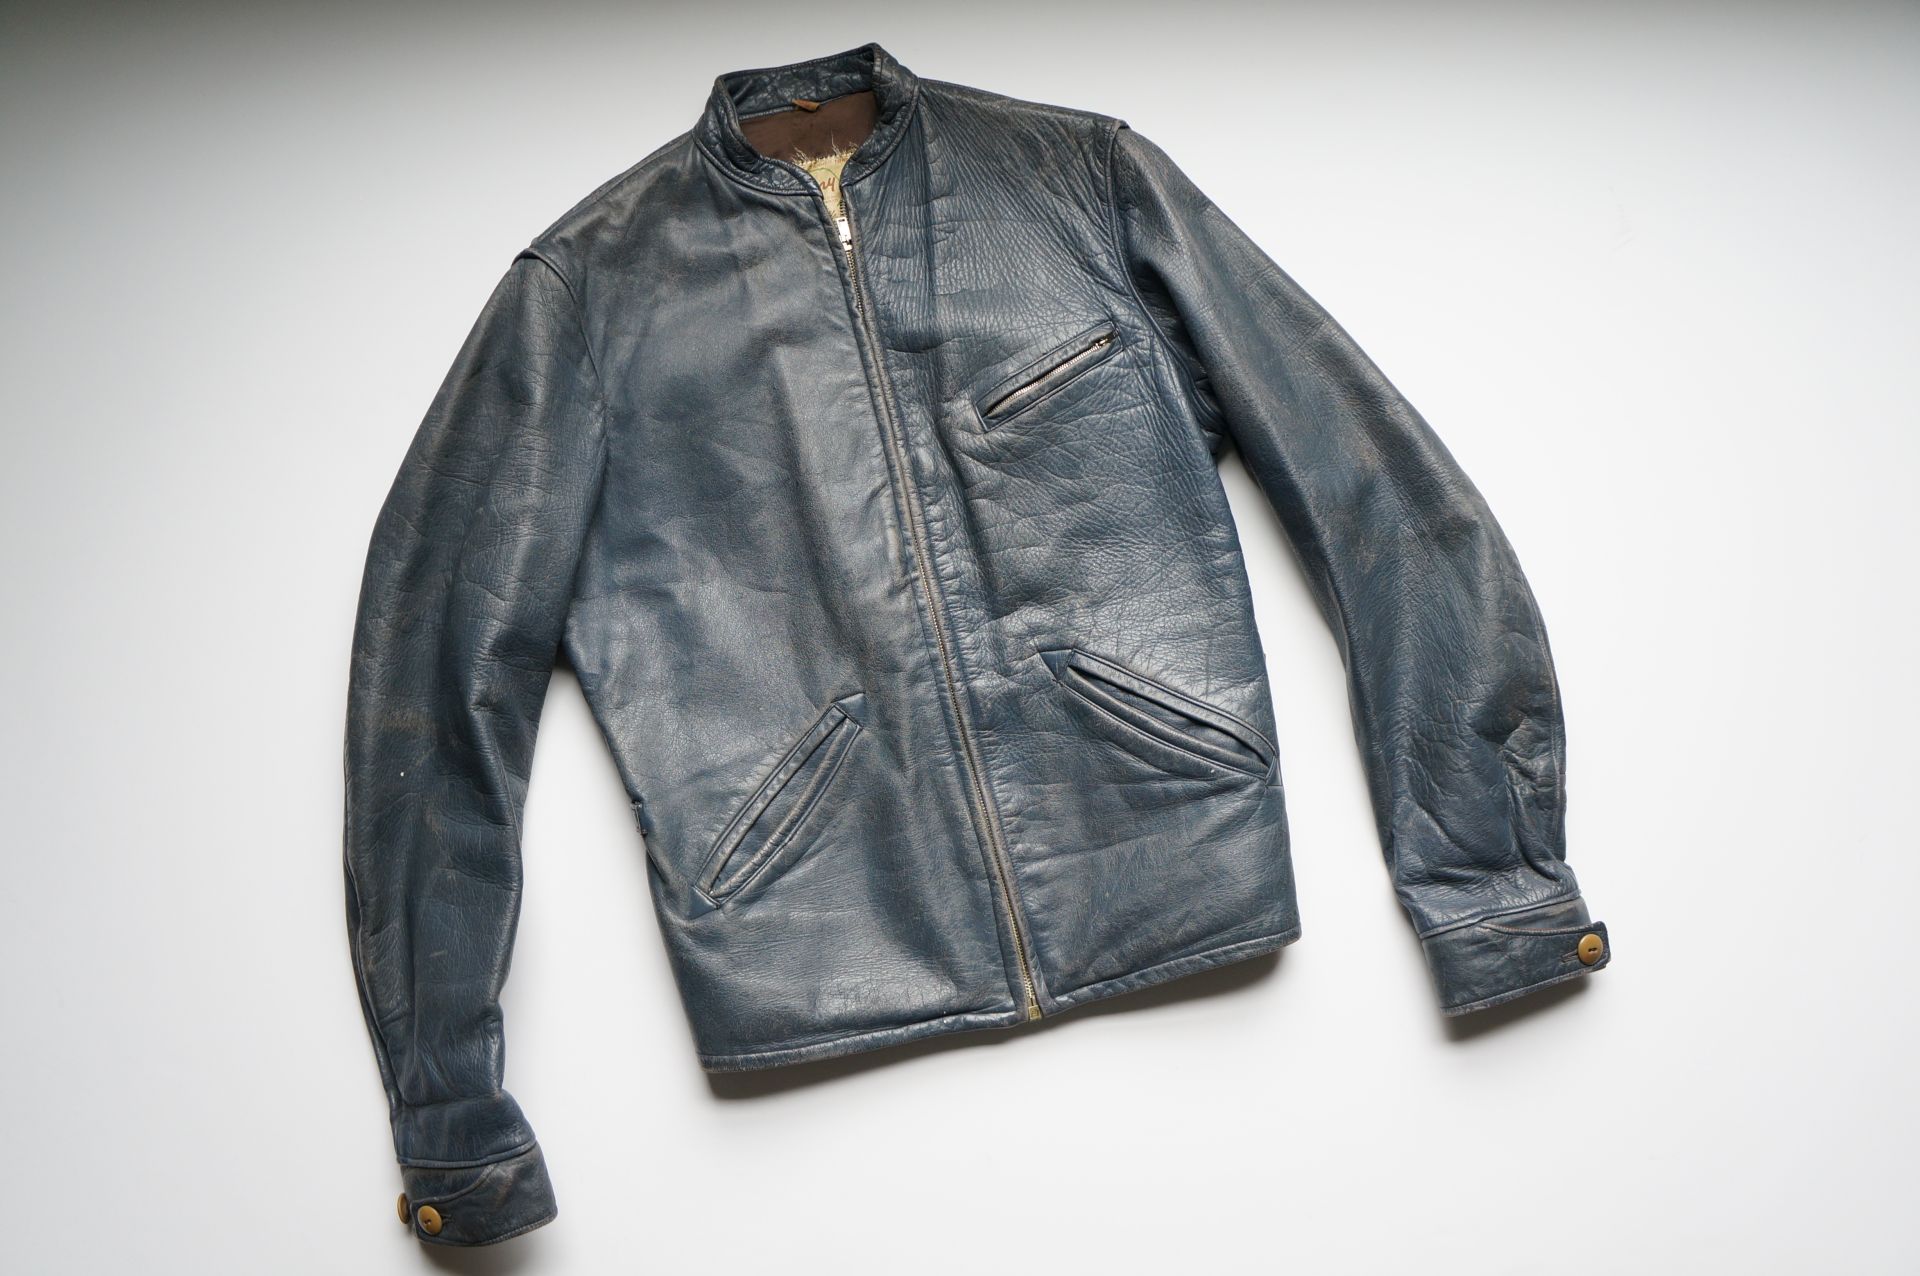 1940s/50s leather jacket for everyday wear? | The Fedora Lounge